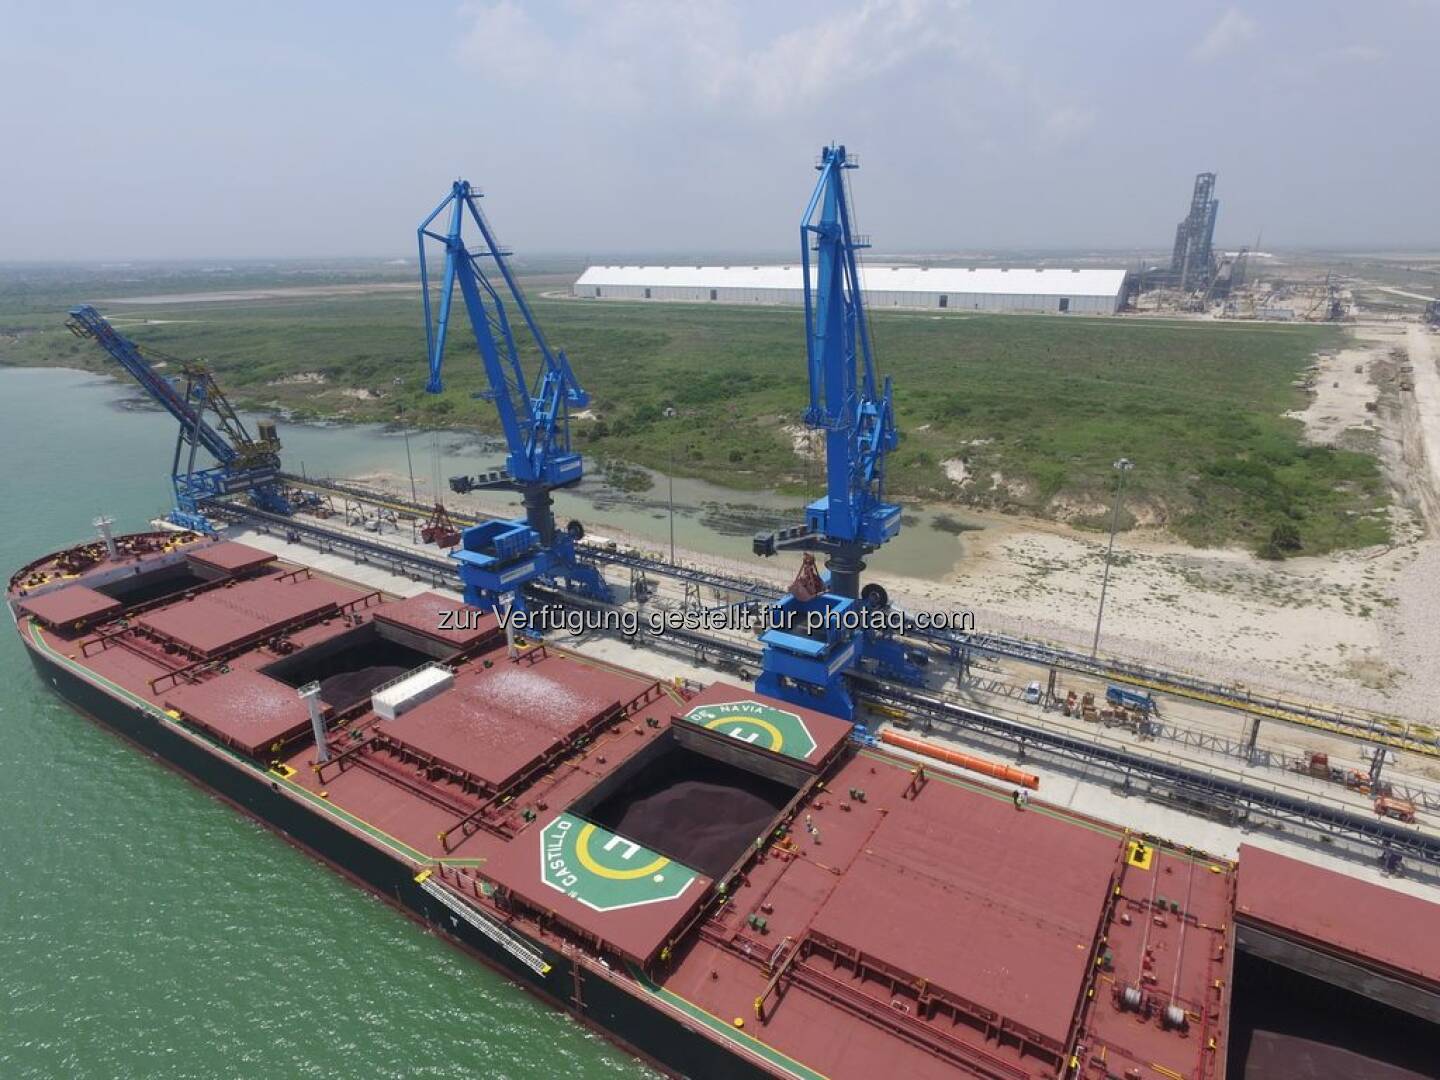 voestalpine First ship carrying ore pellets docks in #Texas! April 30, 2016 was the day: a bulk carrier bearing 100,000 tonnes of ore pellets delivered the first load of pre-materials to the new HBI plant in Corpus Christi, Texas. As a result, further test runs and commissioning activities can now be started. http://bit.ly/1NhBoir  Source: http://facebook.com/voestalpine